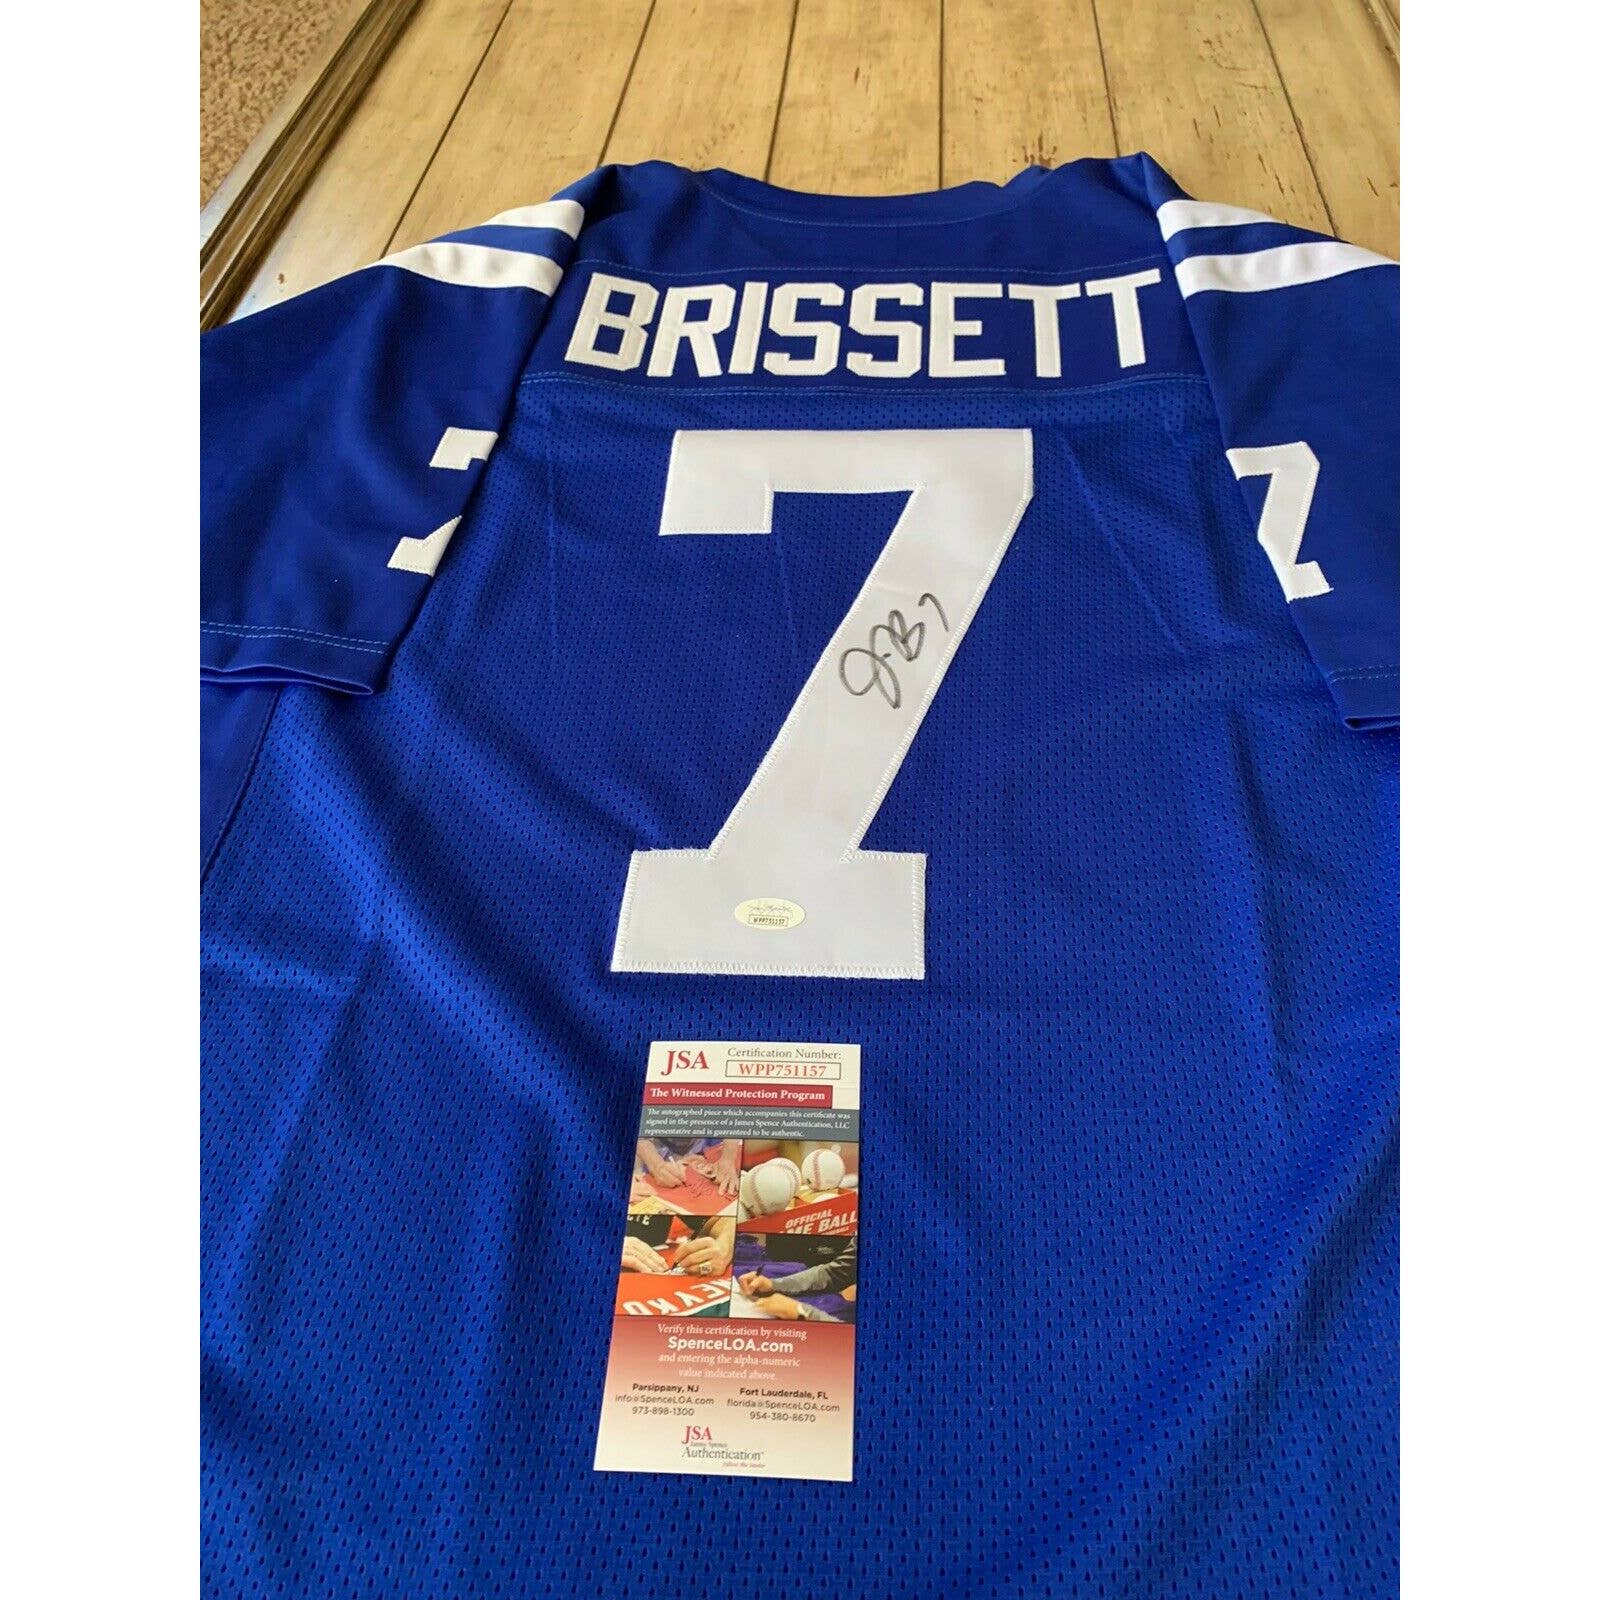 Jacoby Brissett Autographed/Signed Jersey JSA COA Indianapolis Colts - TreasuresEvolved